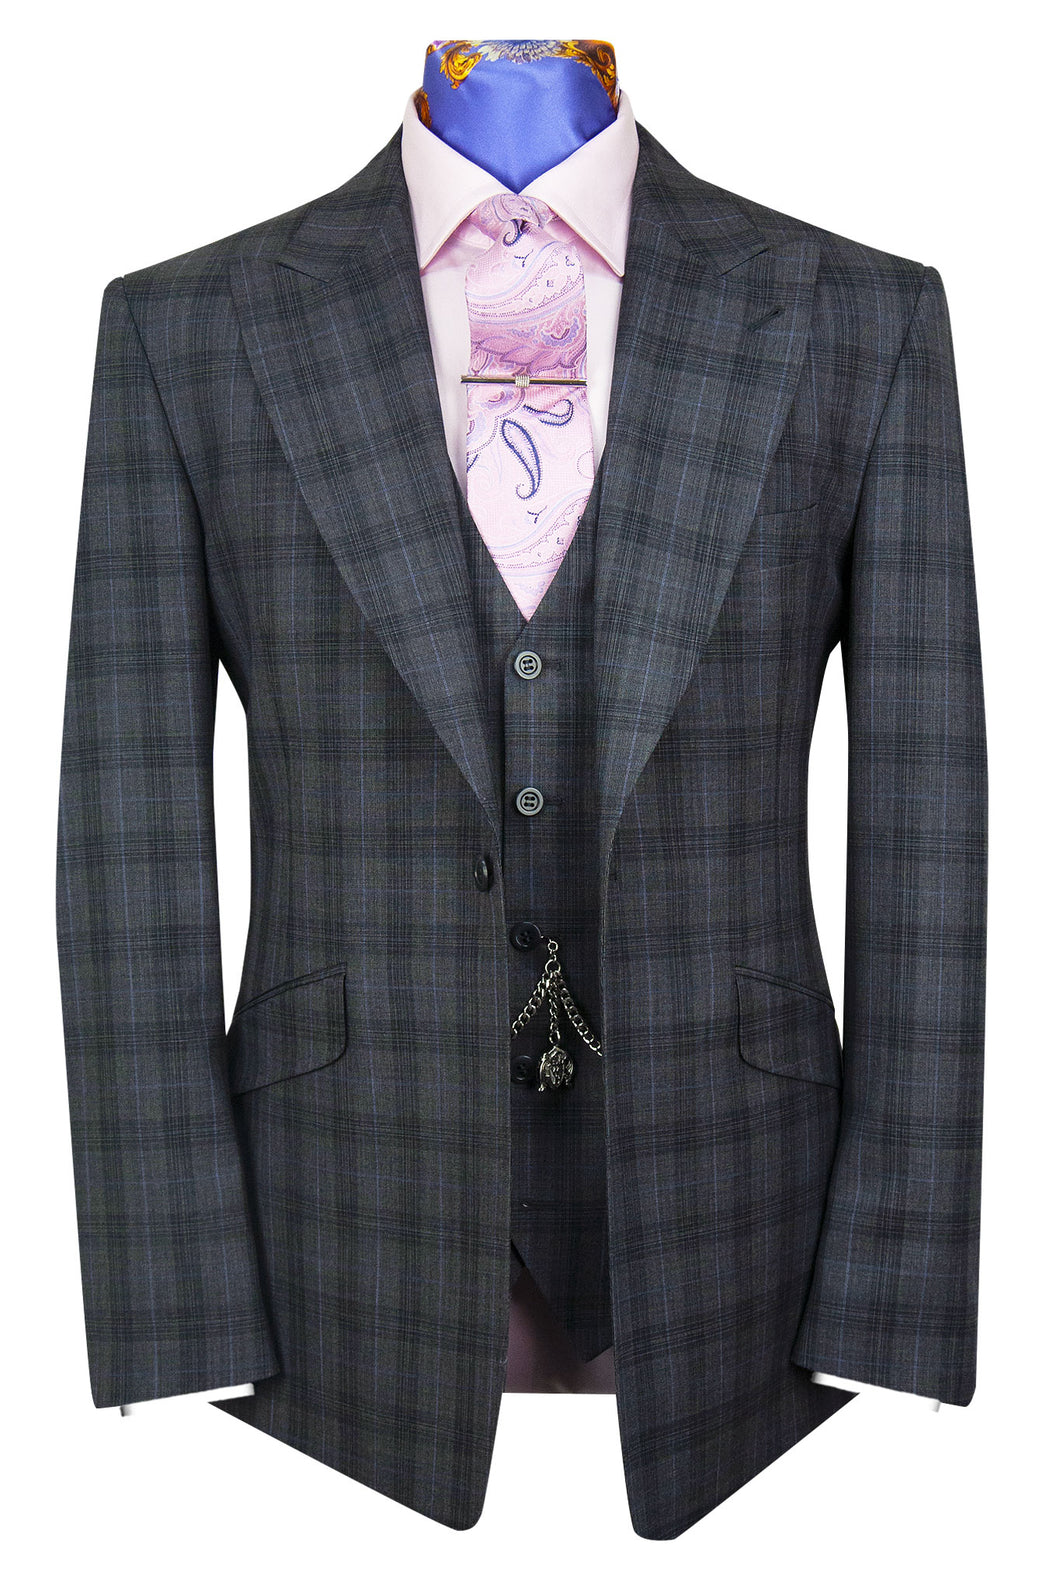 The Leonardo Shadow Grey Suit with Two Colour Grid Check